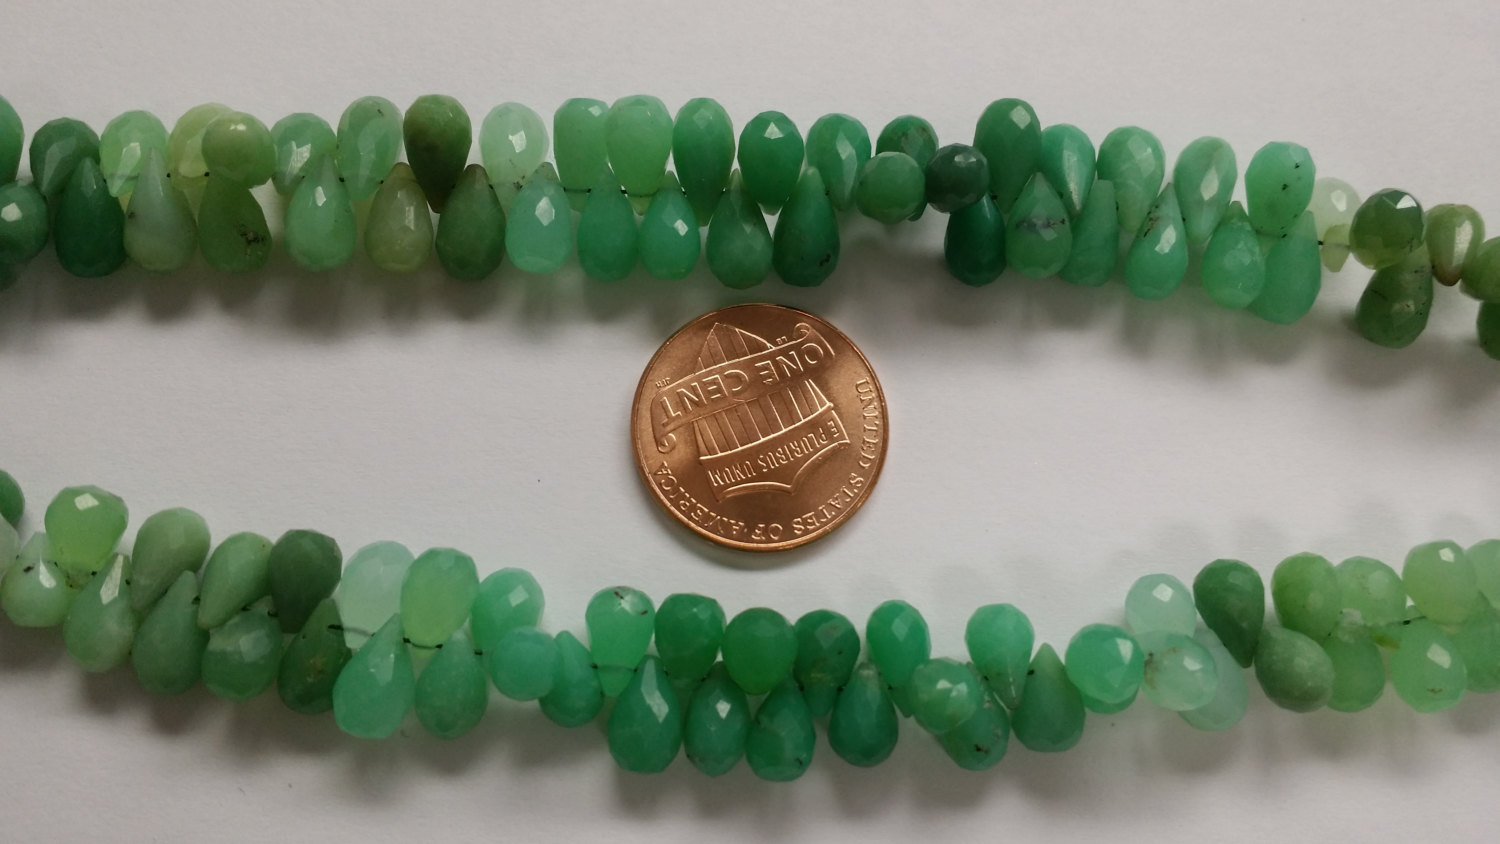 Chrysoprase Drops Faceted